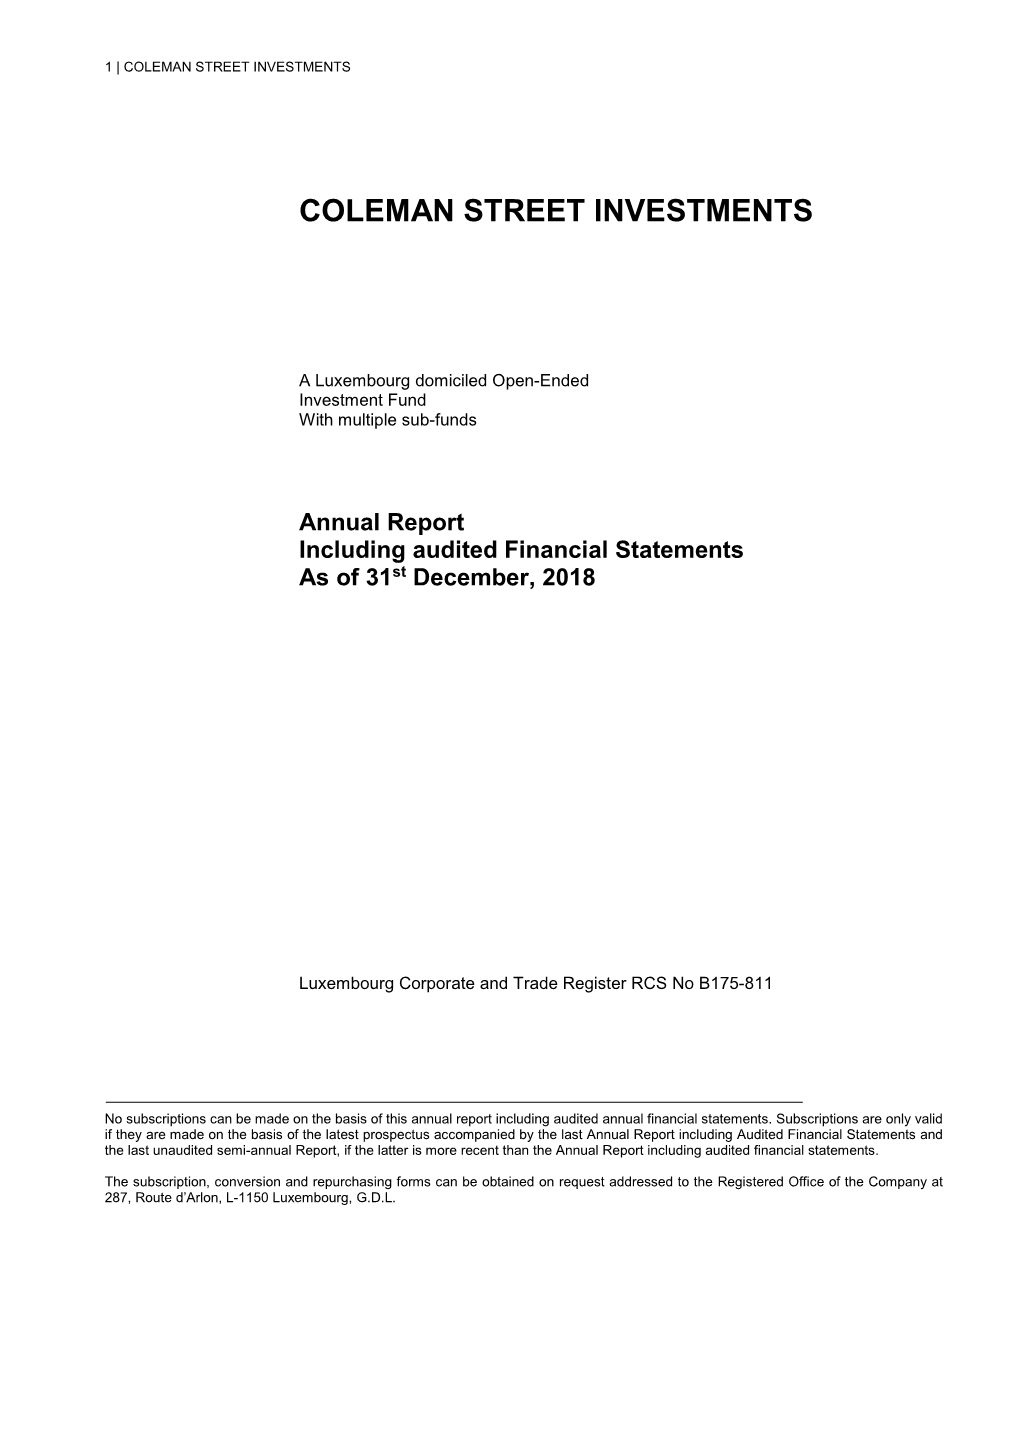 Coleman Street Investments